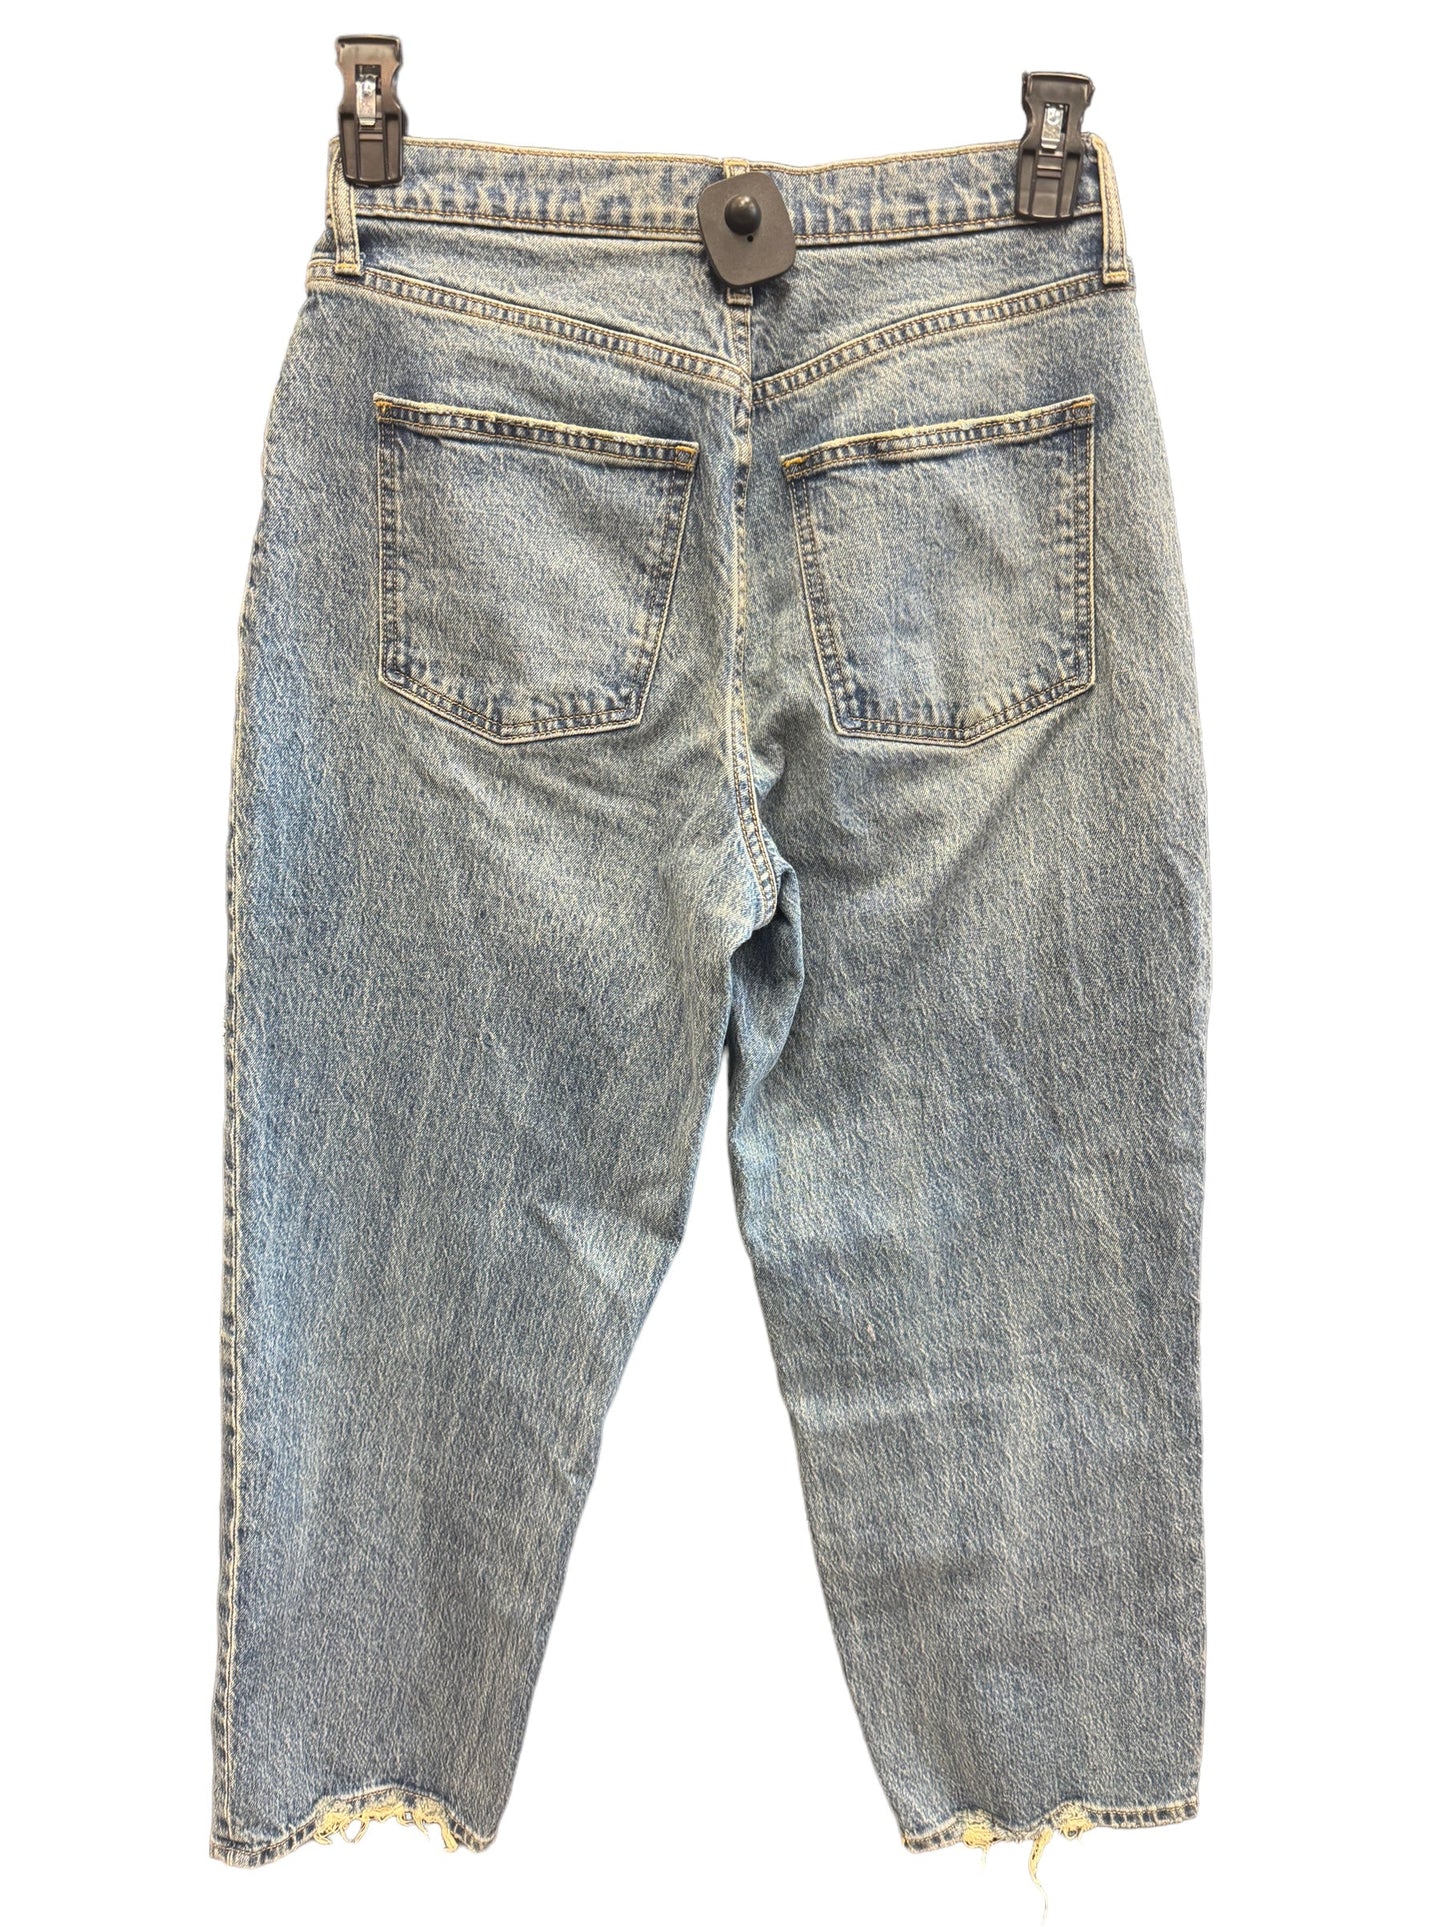 Jeans Relaxed/boyfriend By Universal Thread  Size: 6